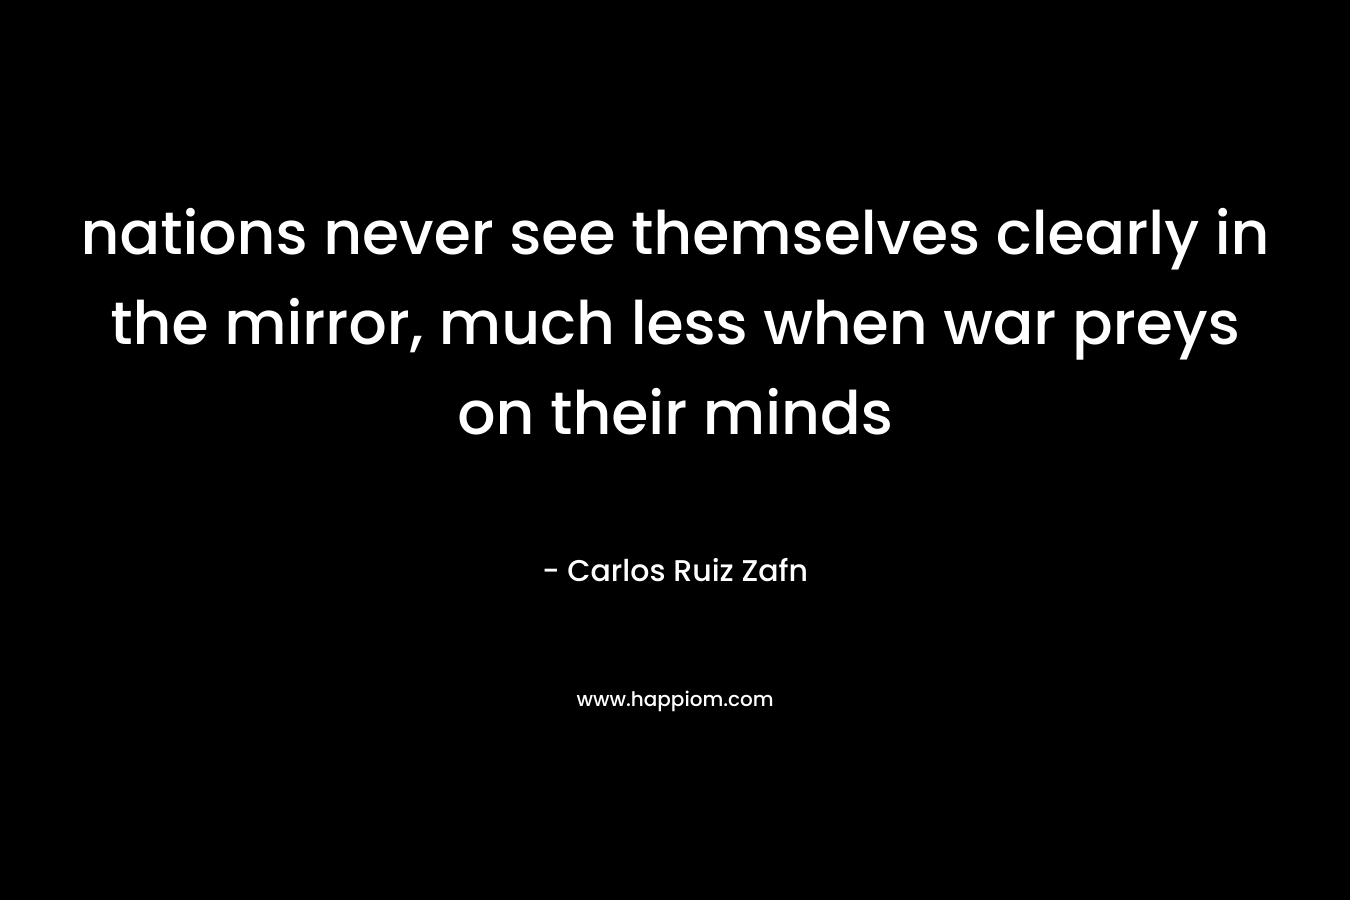 nations never see themselves clearly in the mirror, much less when war preys on their minds